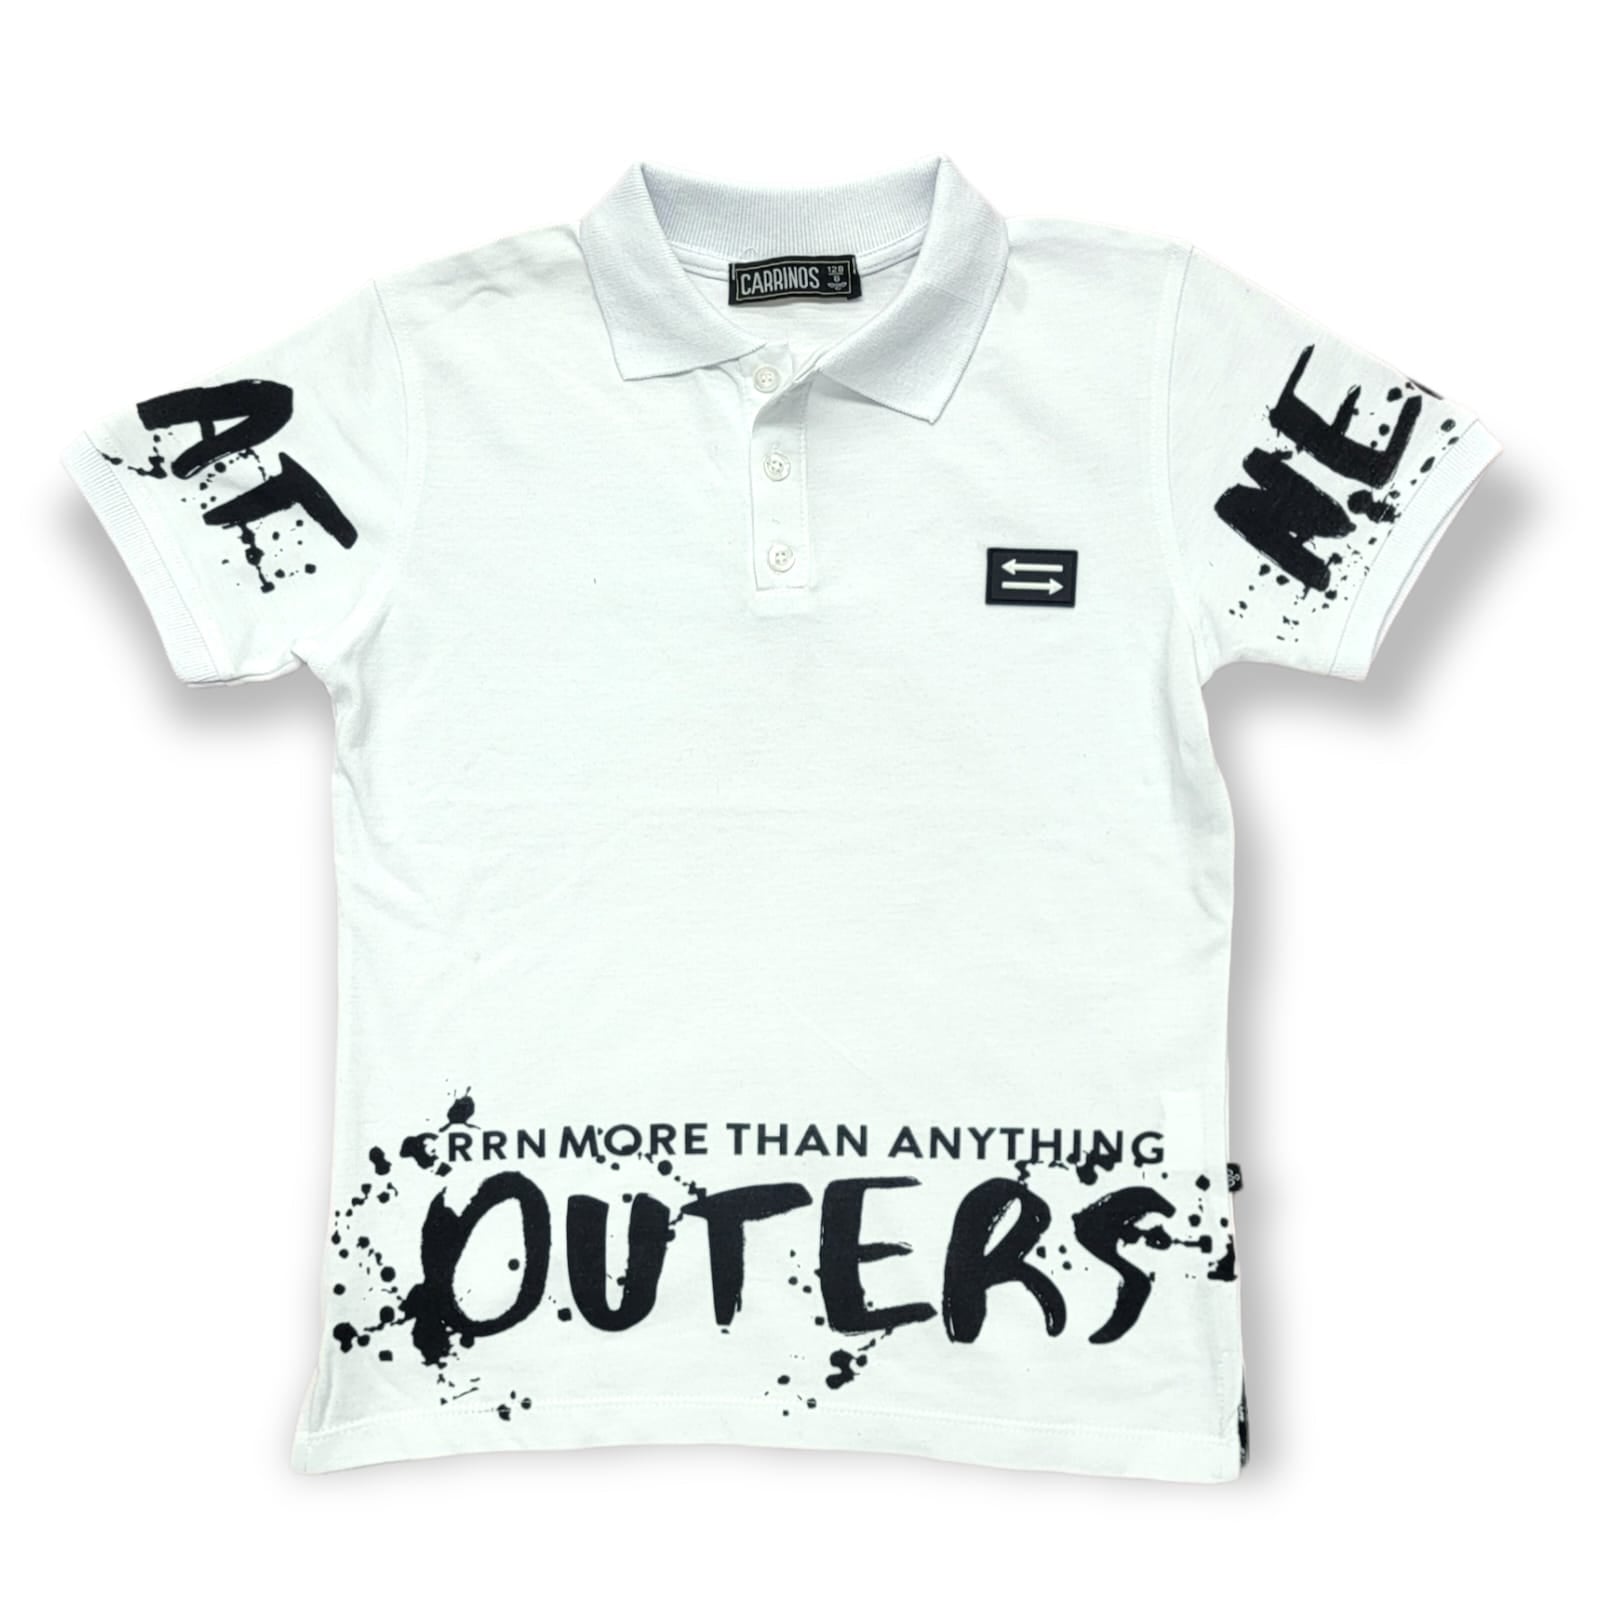 The Outers Boys Polo Shirt